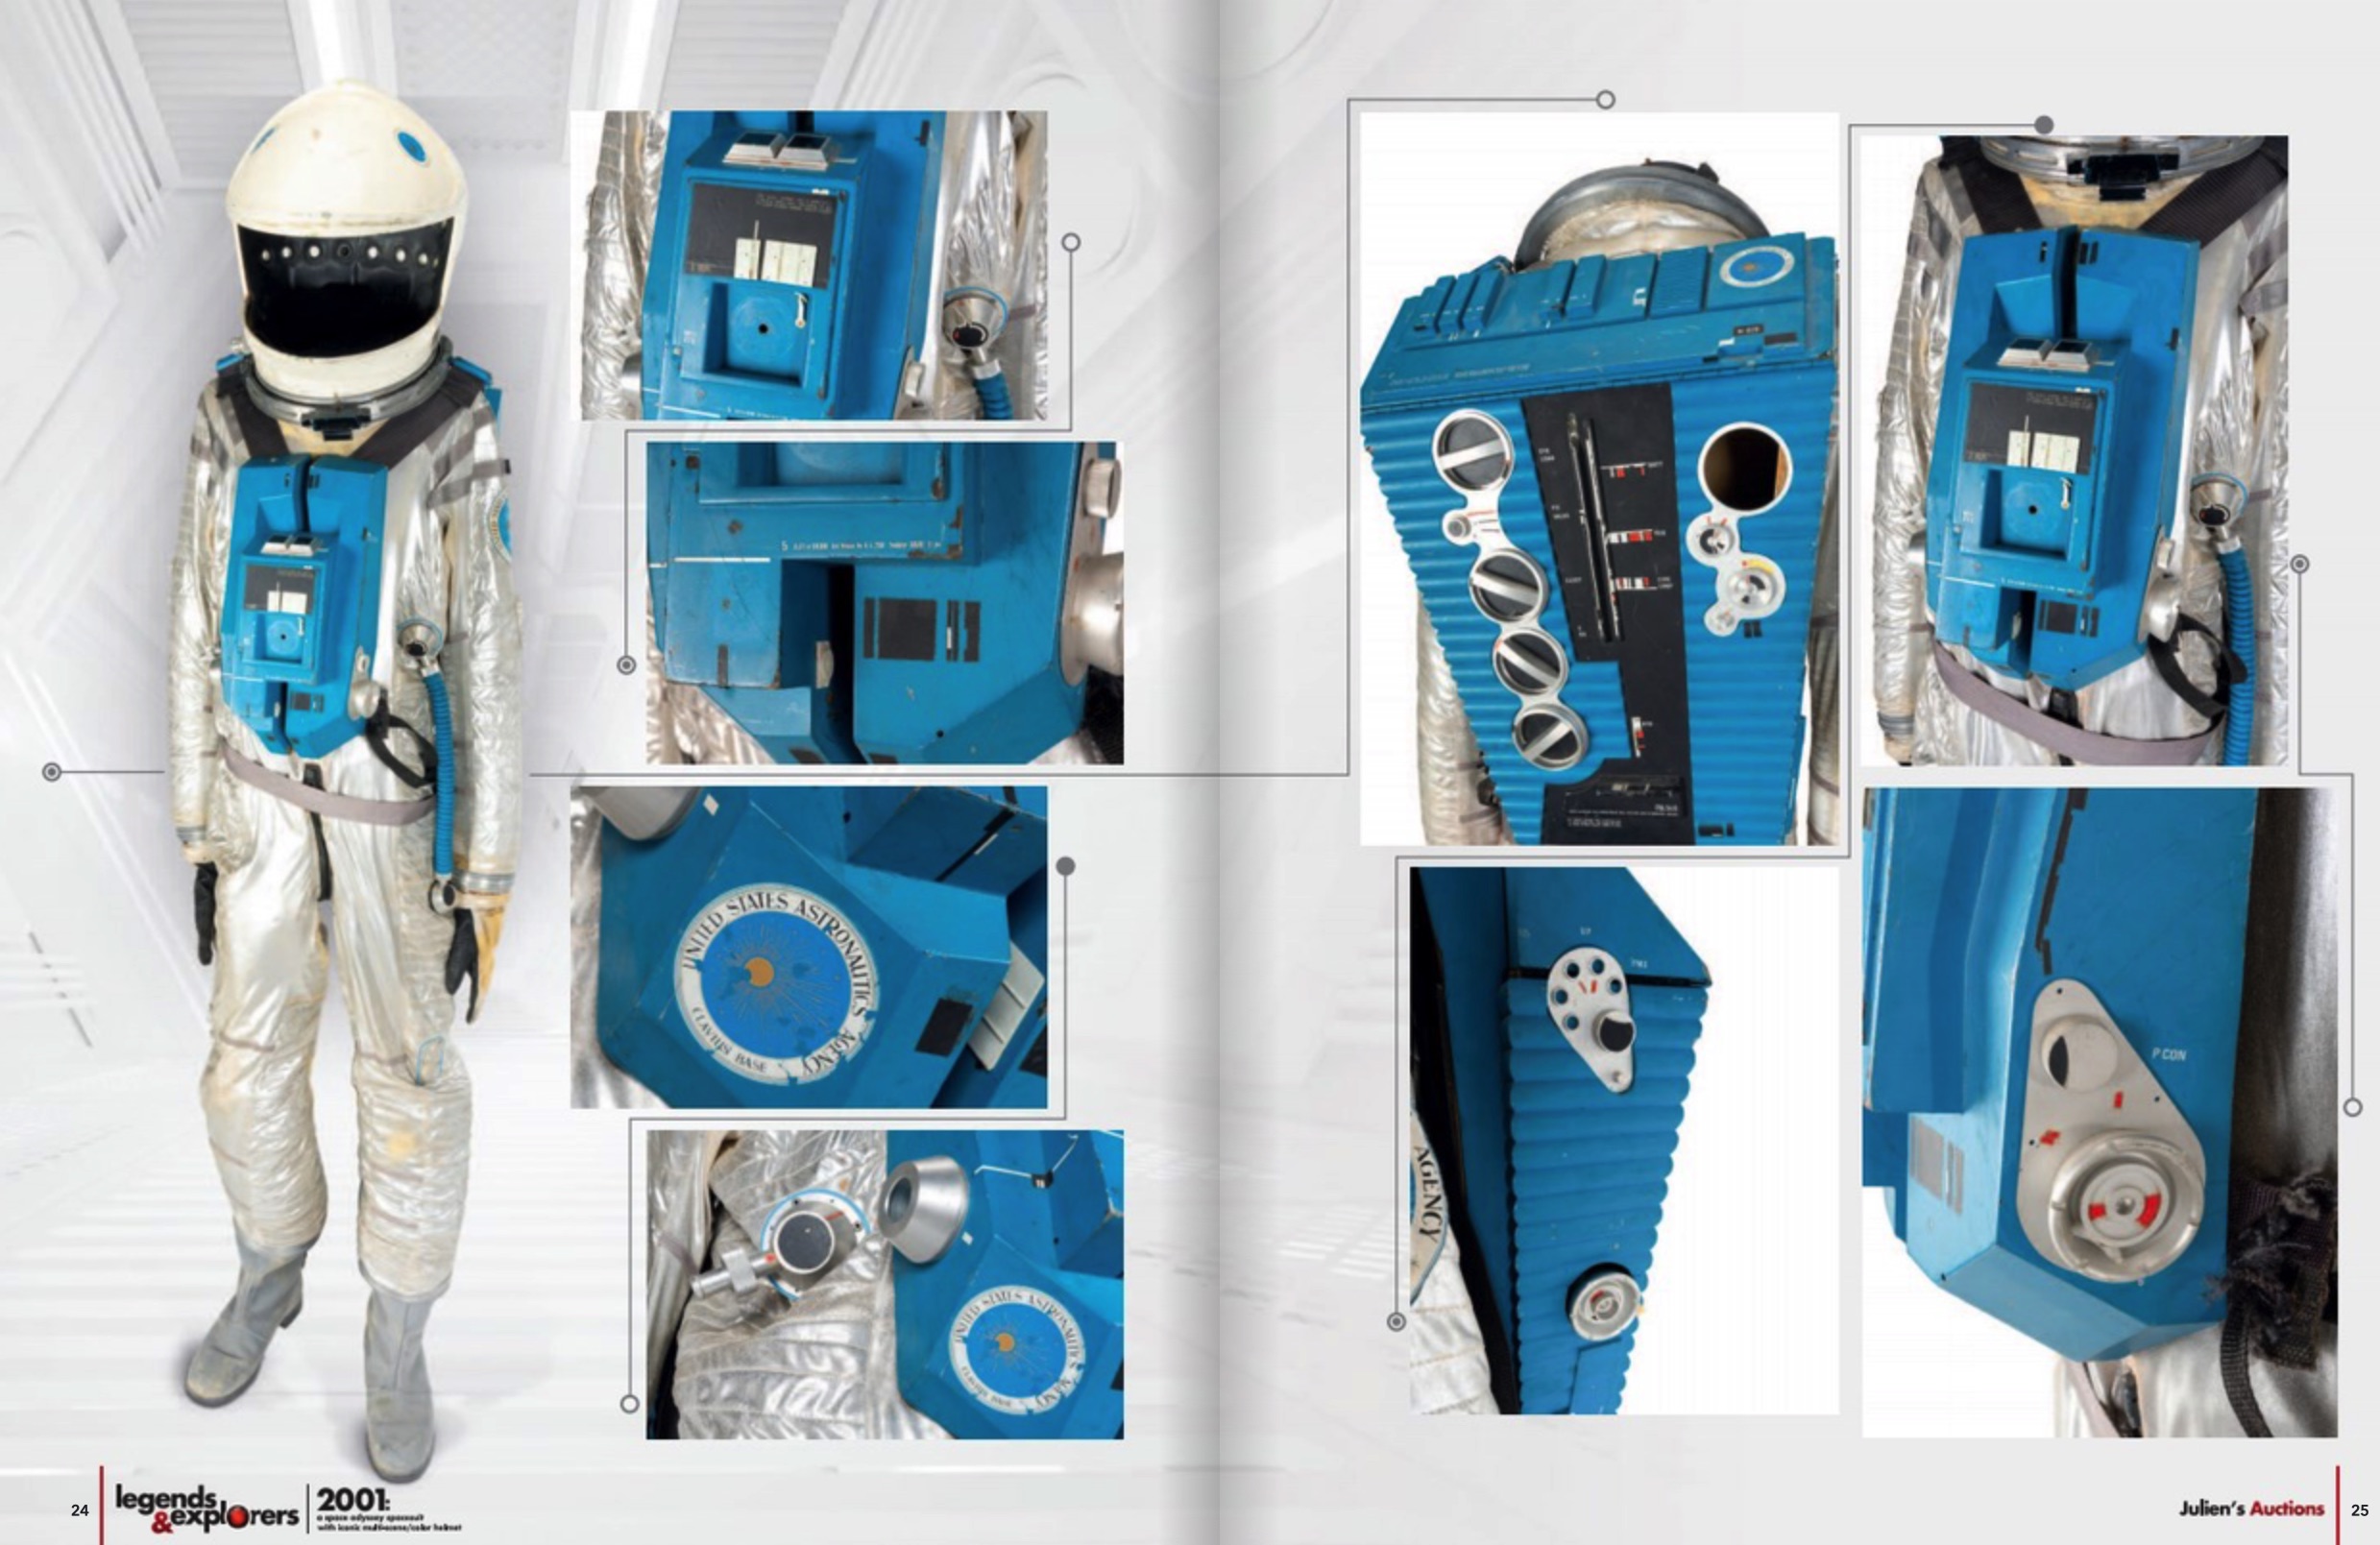 Spacesuit From 2001: A Space Odyssey Is Up For Auction | Digital 